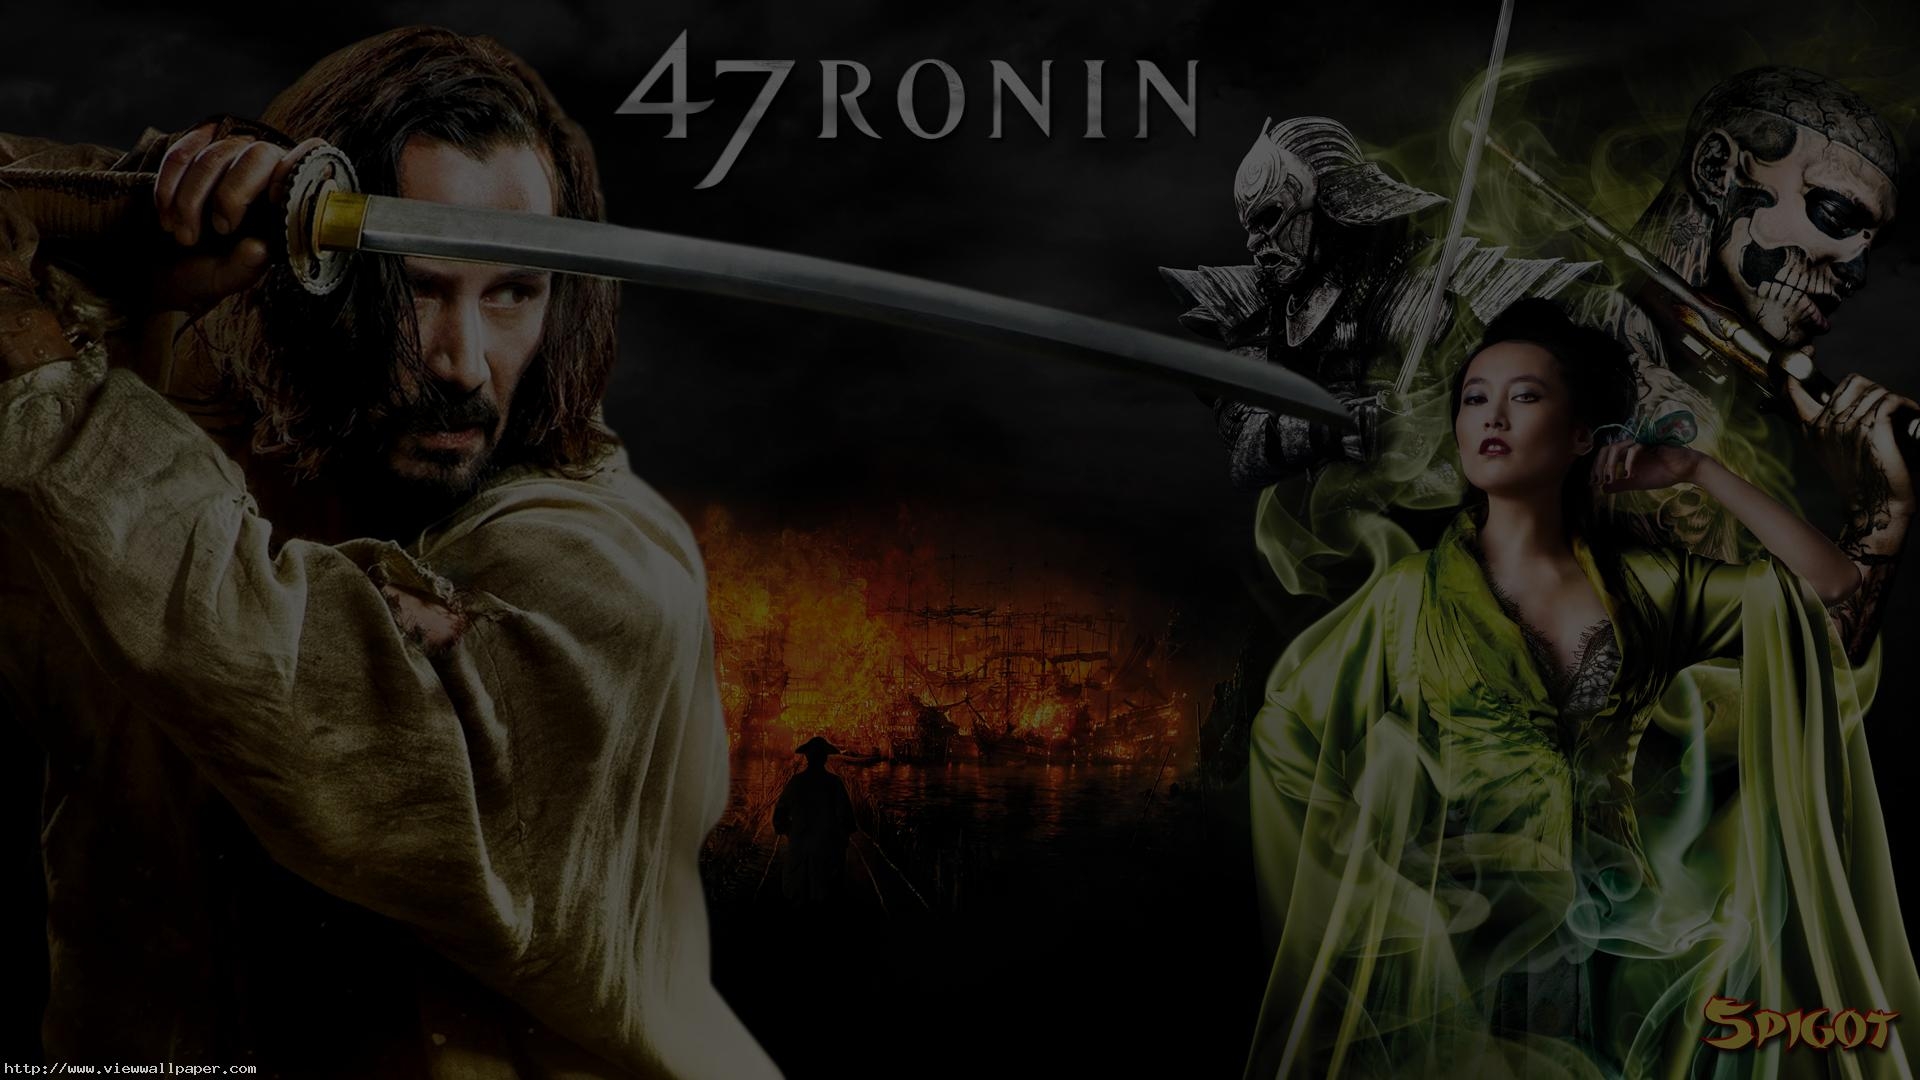 47 Ronin, Hd Wallpaper From The Movie 47 Ronin - Rick Genest 47 Ronins , HD Wallpaper & Backgrounds